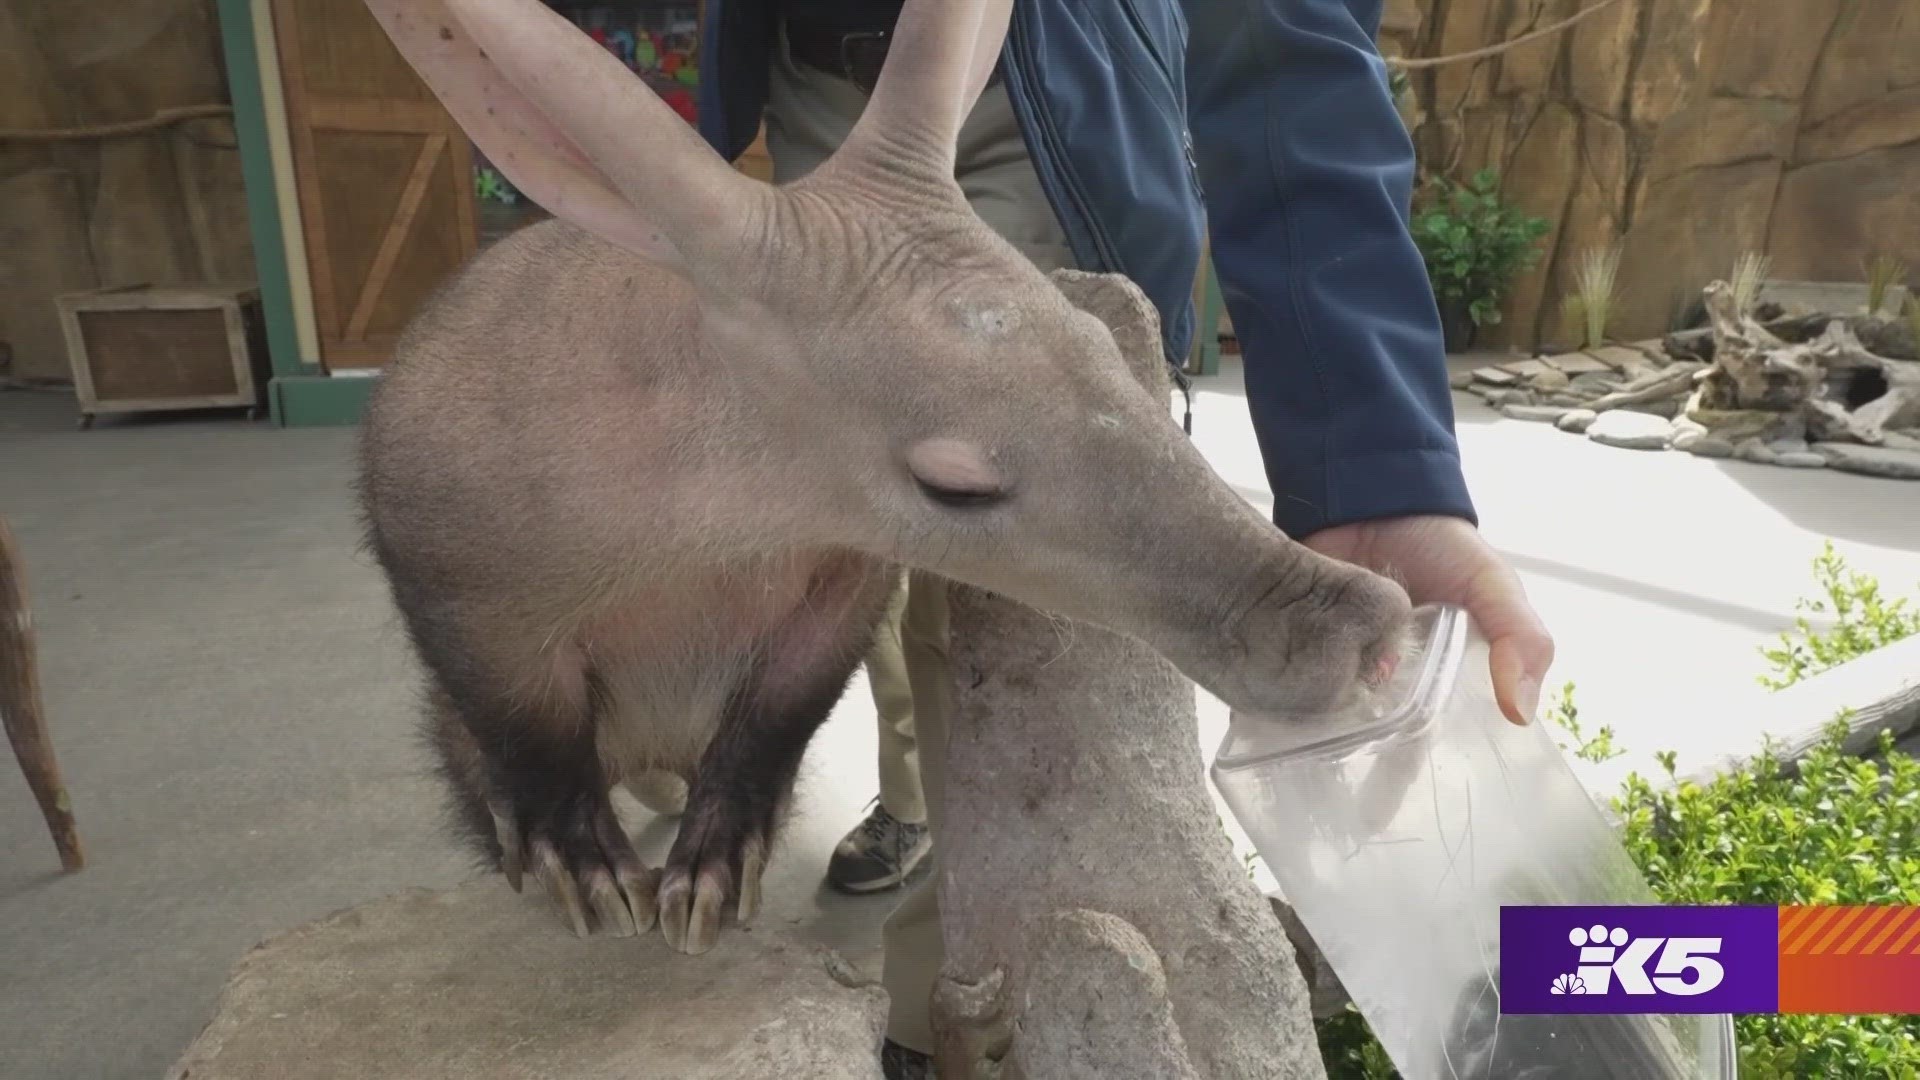 Live animal shows return to Point Defiance Zoo May 4th. #k5evening